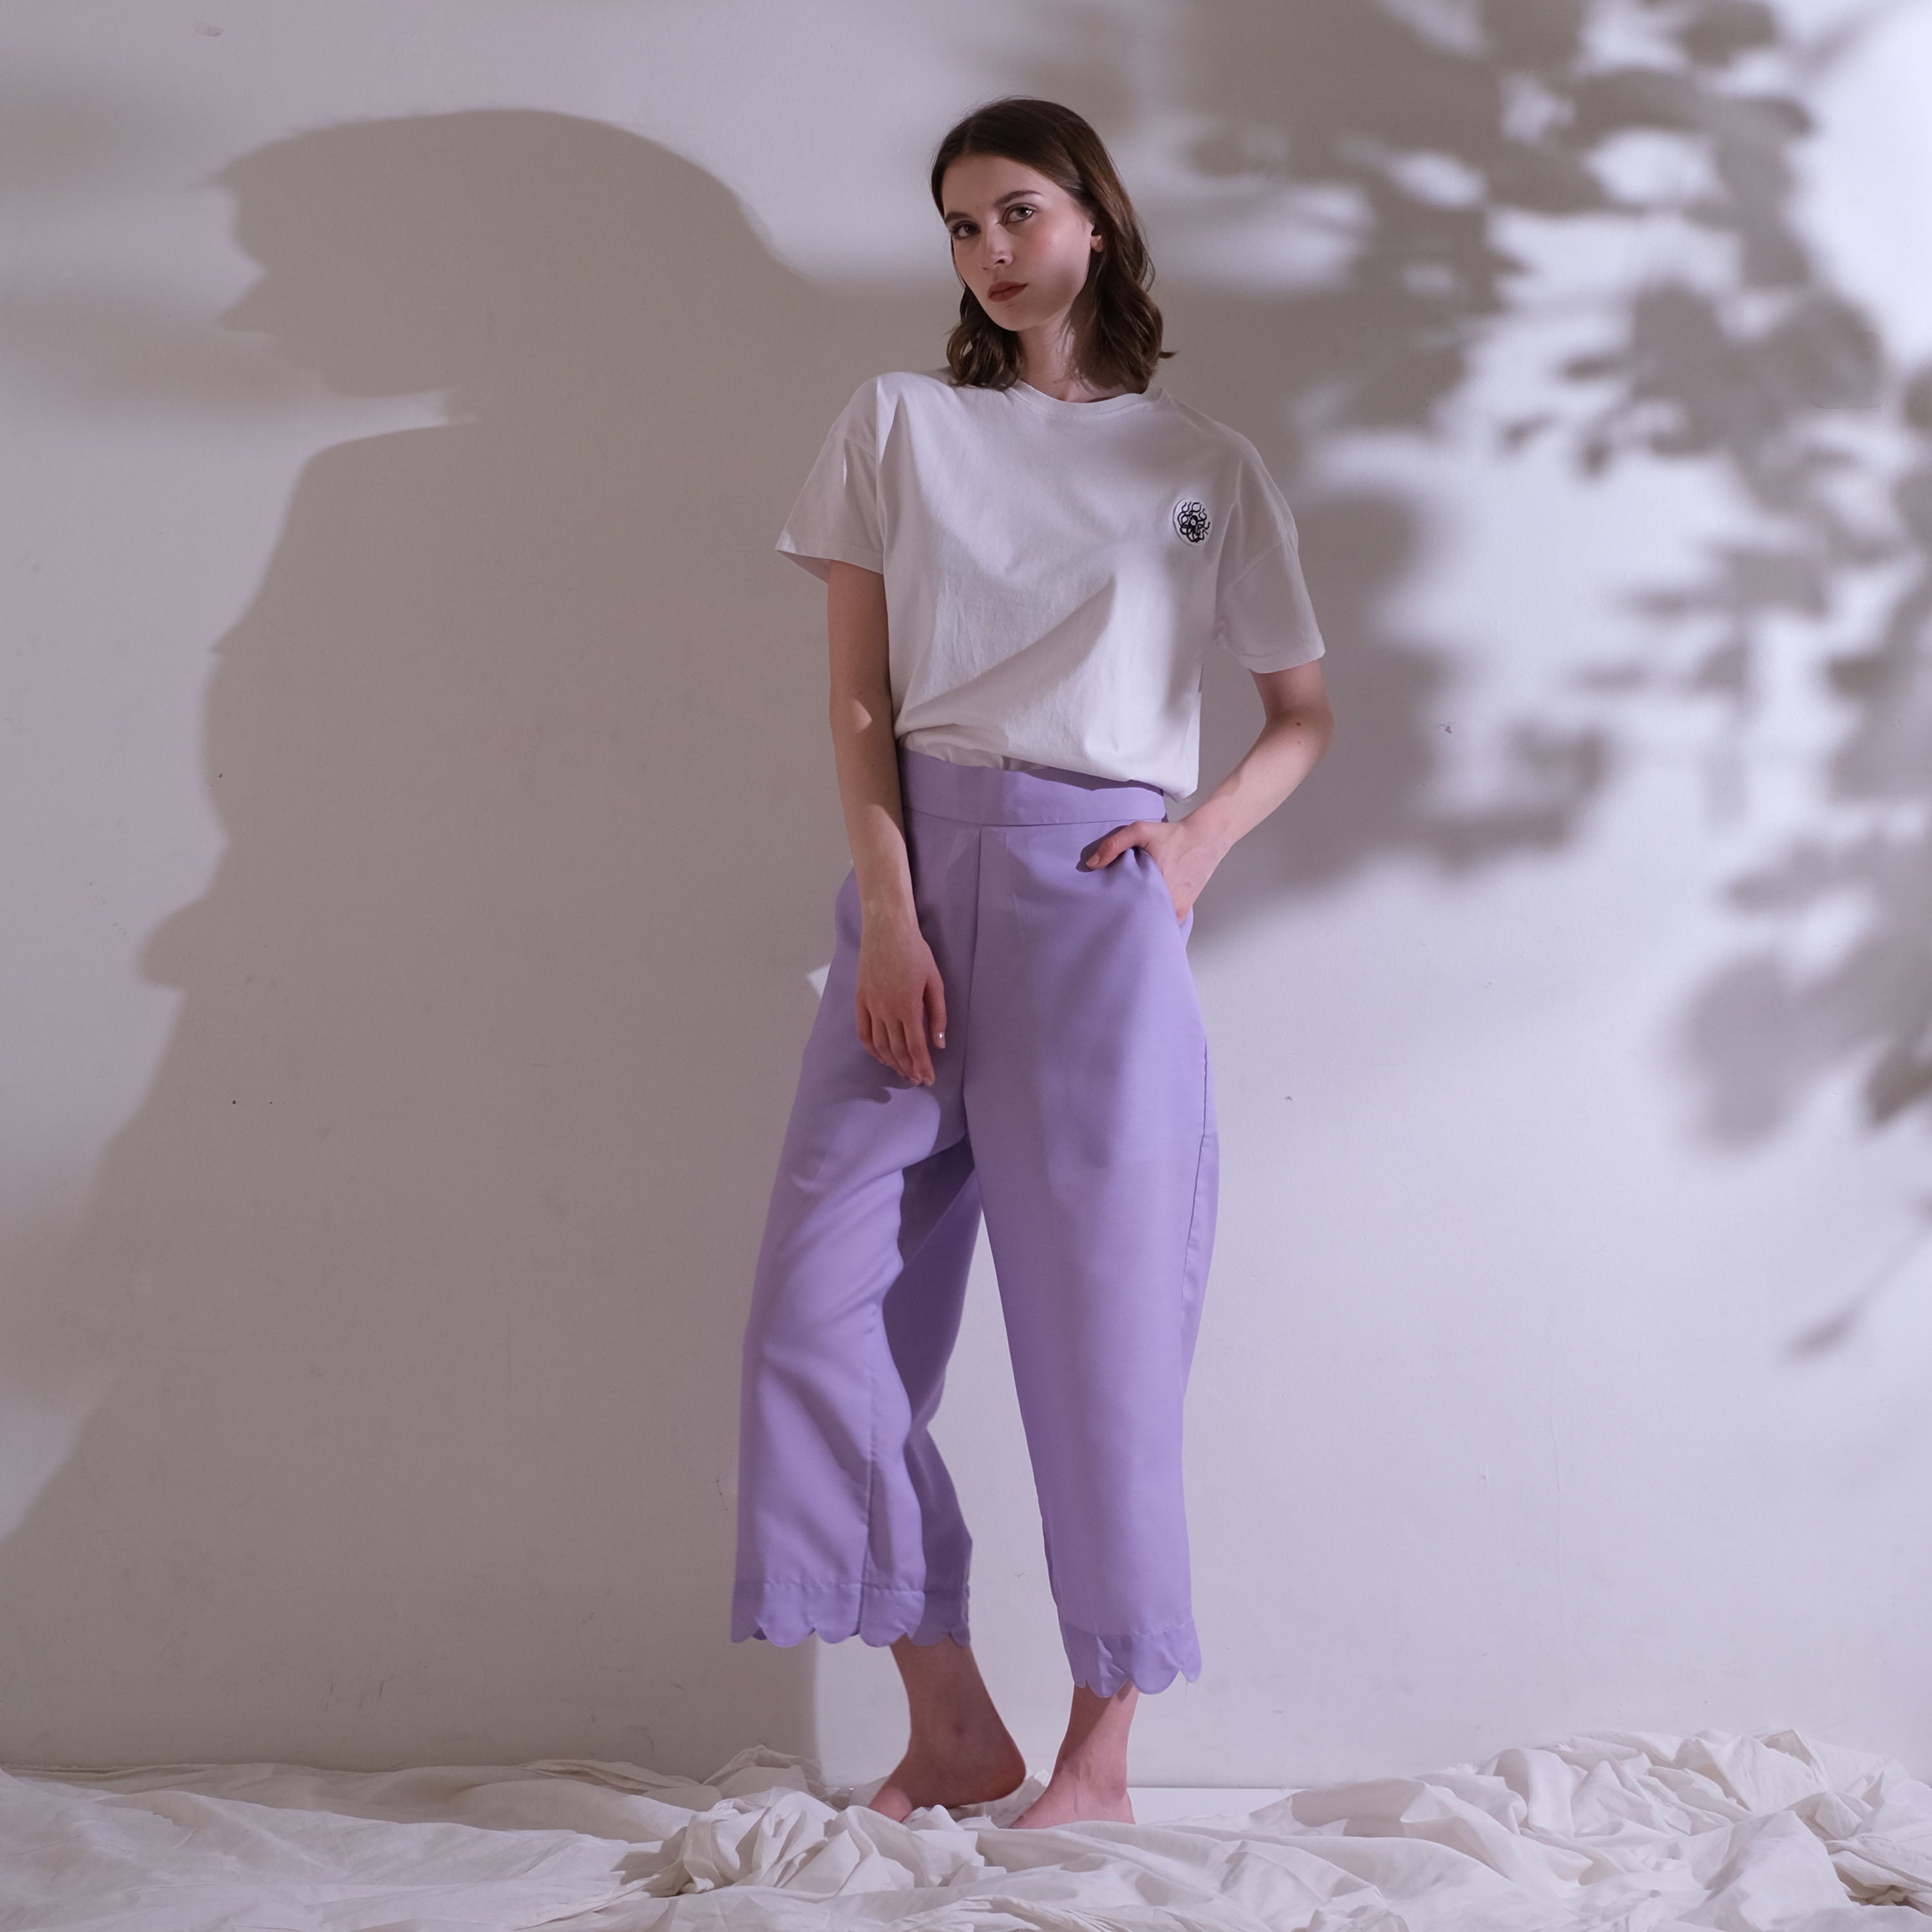 Lilac Scallop Basic Trousers